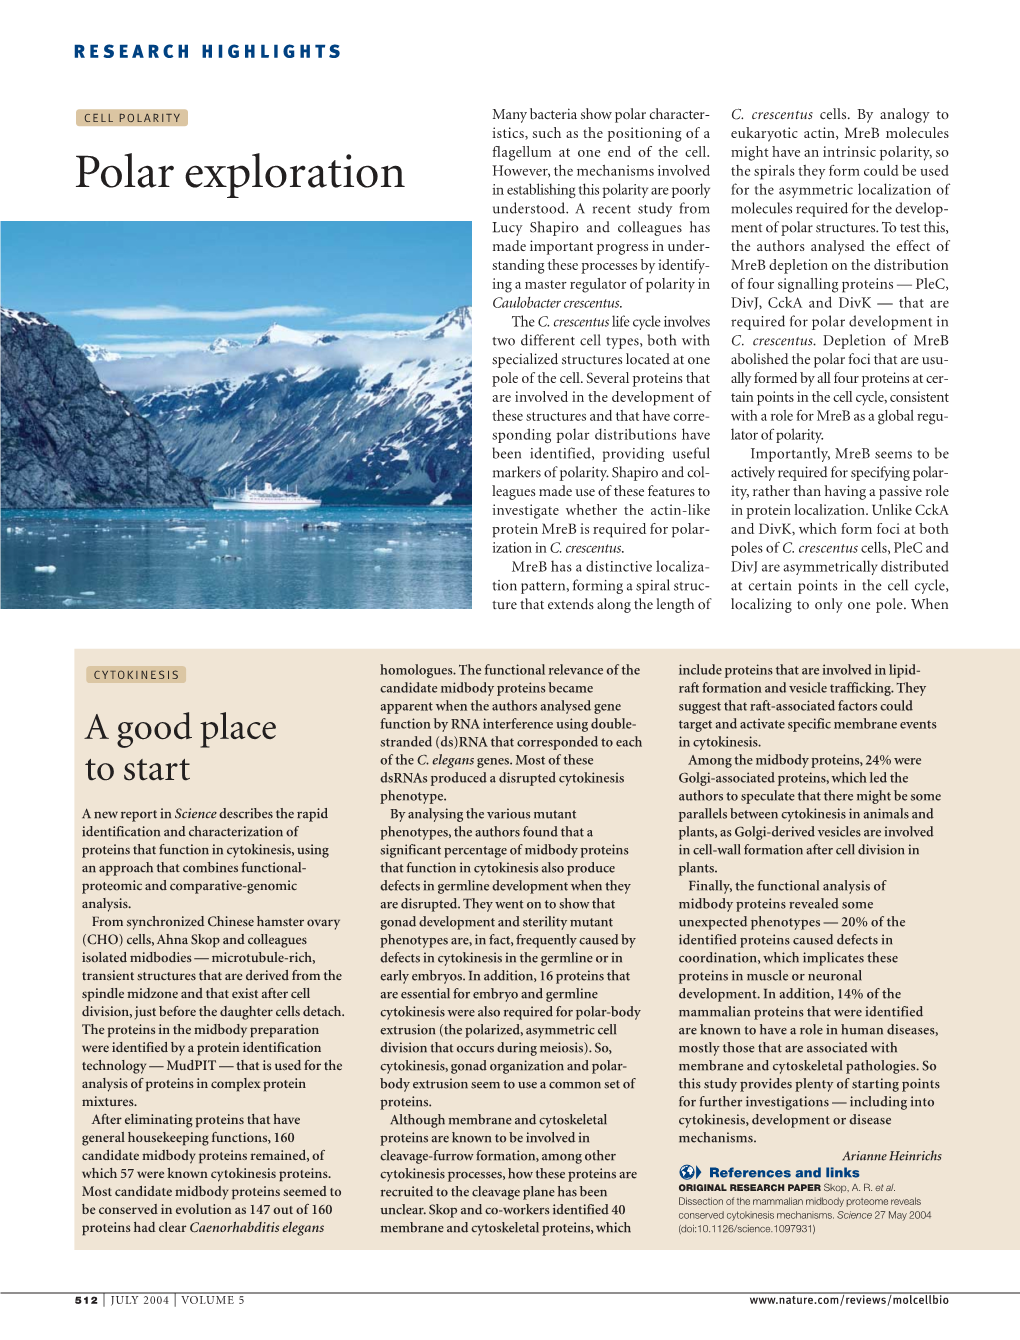 Polar Exploration in Establishing This Polarity Are Poorly for the Asymmetric Localization of Understood